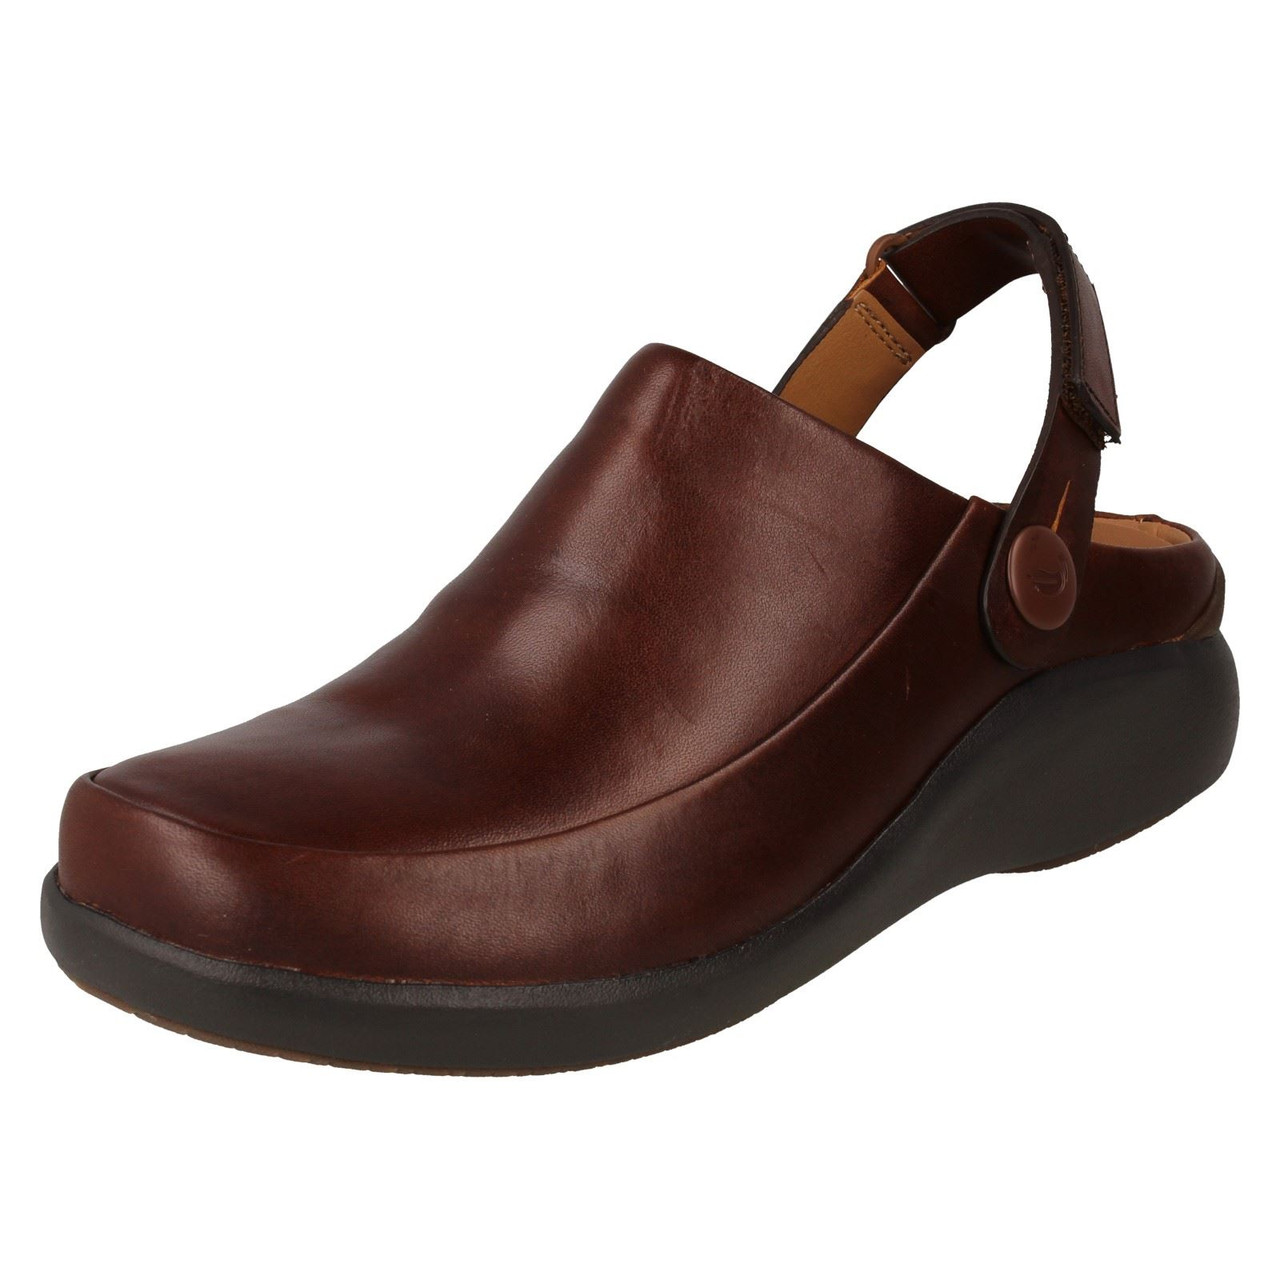 Ladies Unstructured by Clarks Slip On Mule Shoes Un Loop 2 Strap